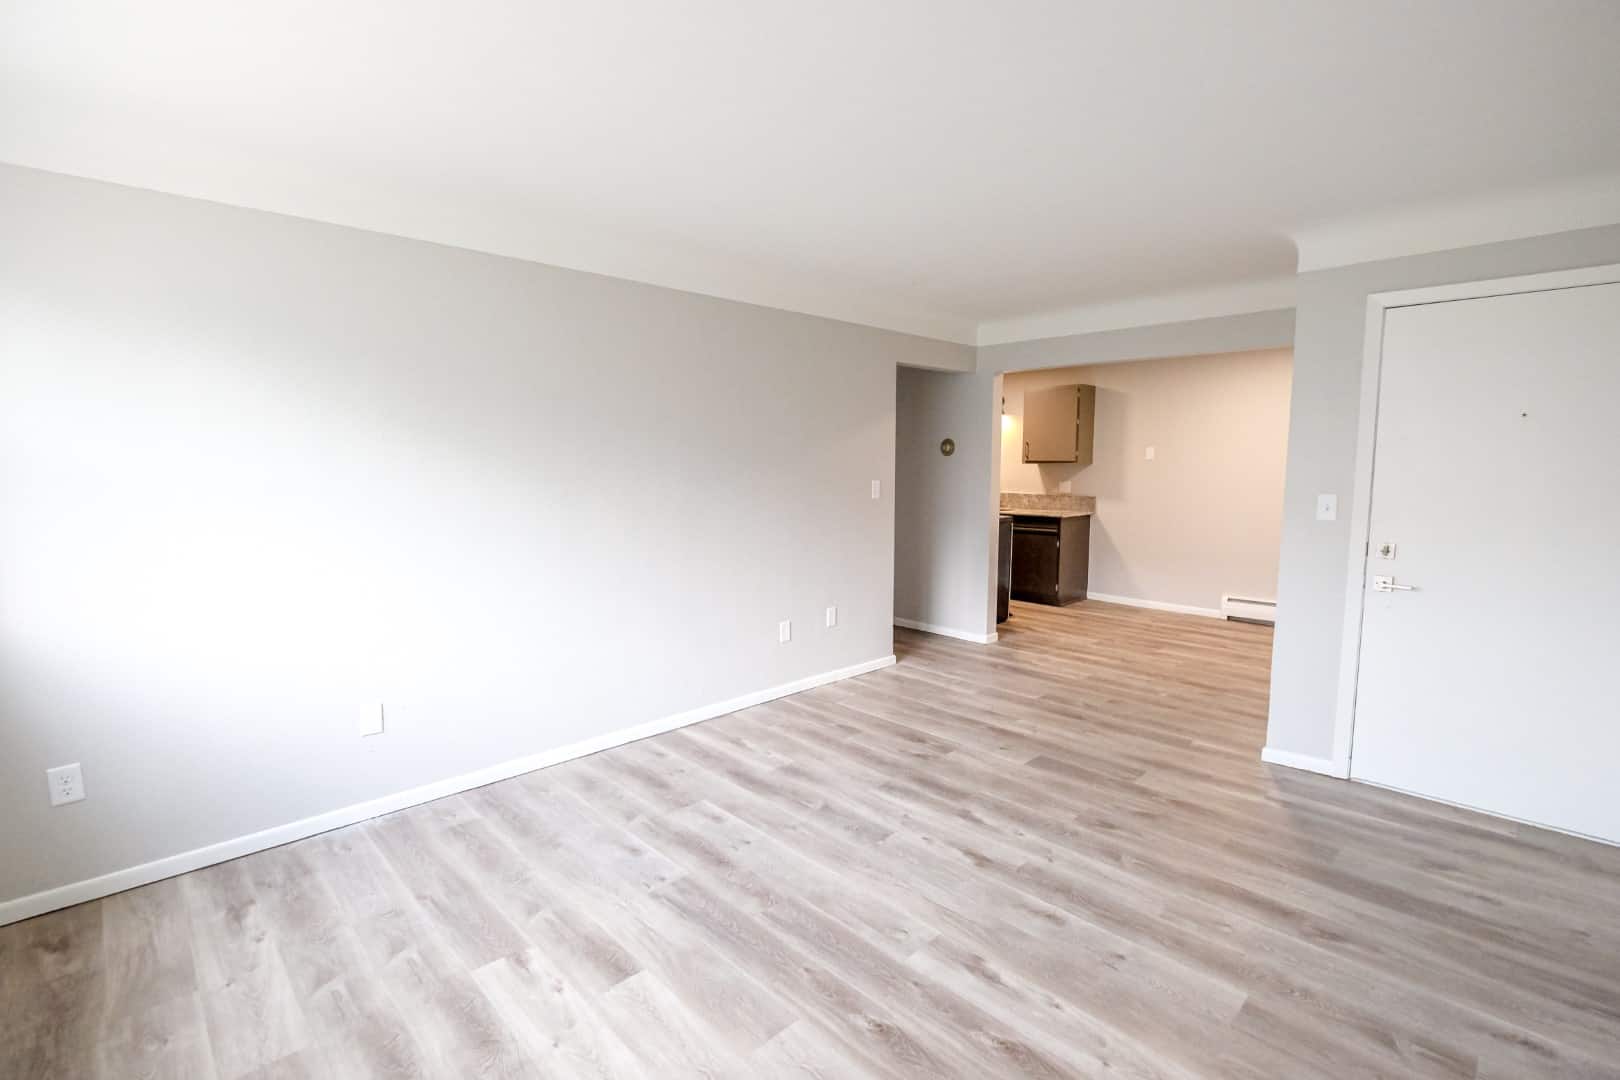 An image of the open, spacious floor plans available at The Concord. 